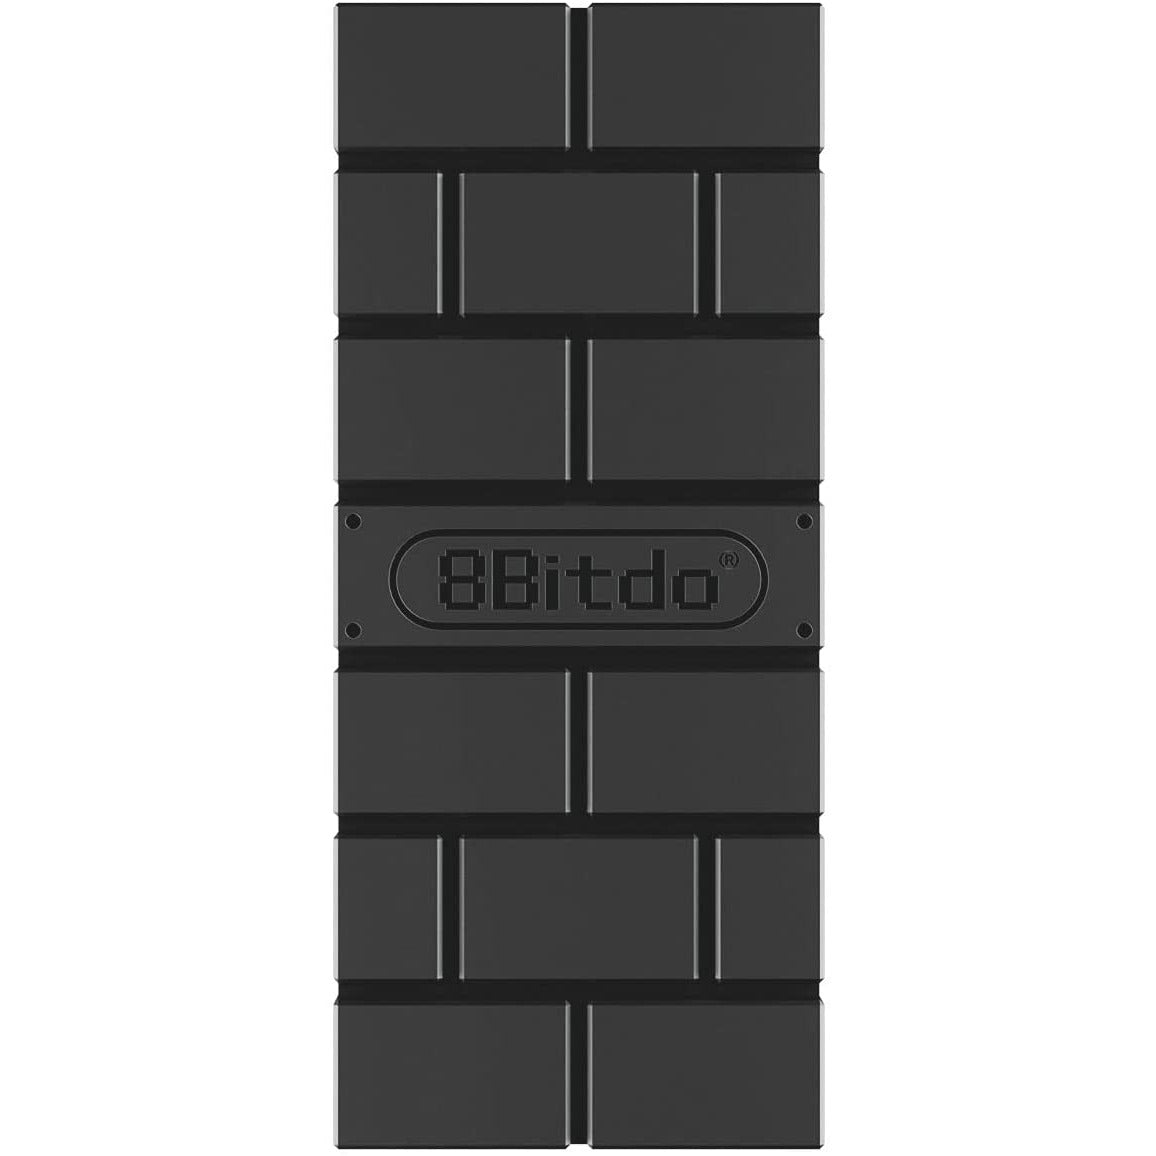 8BitDo Wireless USB Adapter 2 for Most Gaming Controllers Black